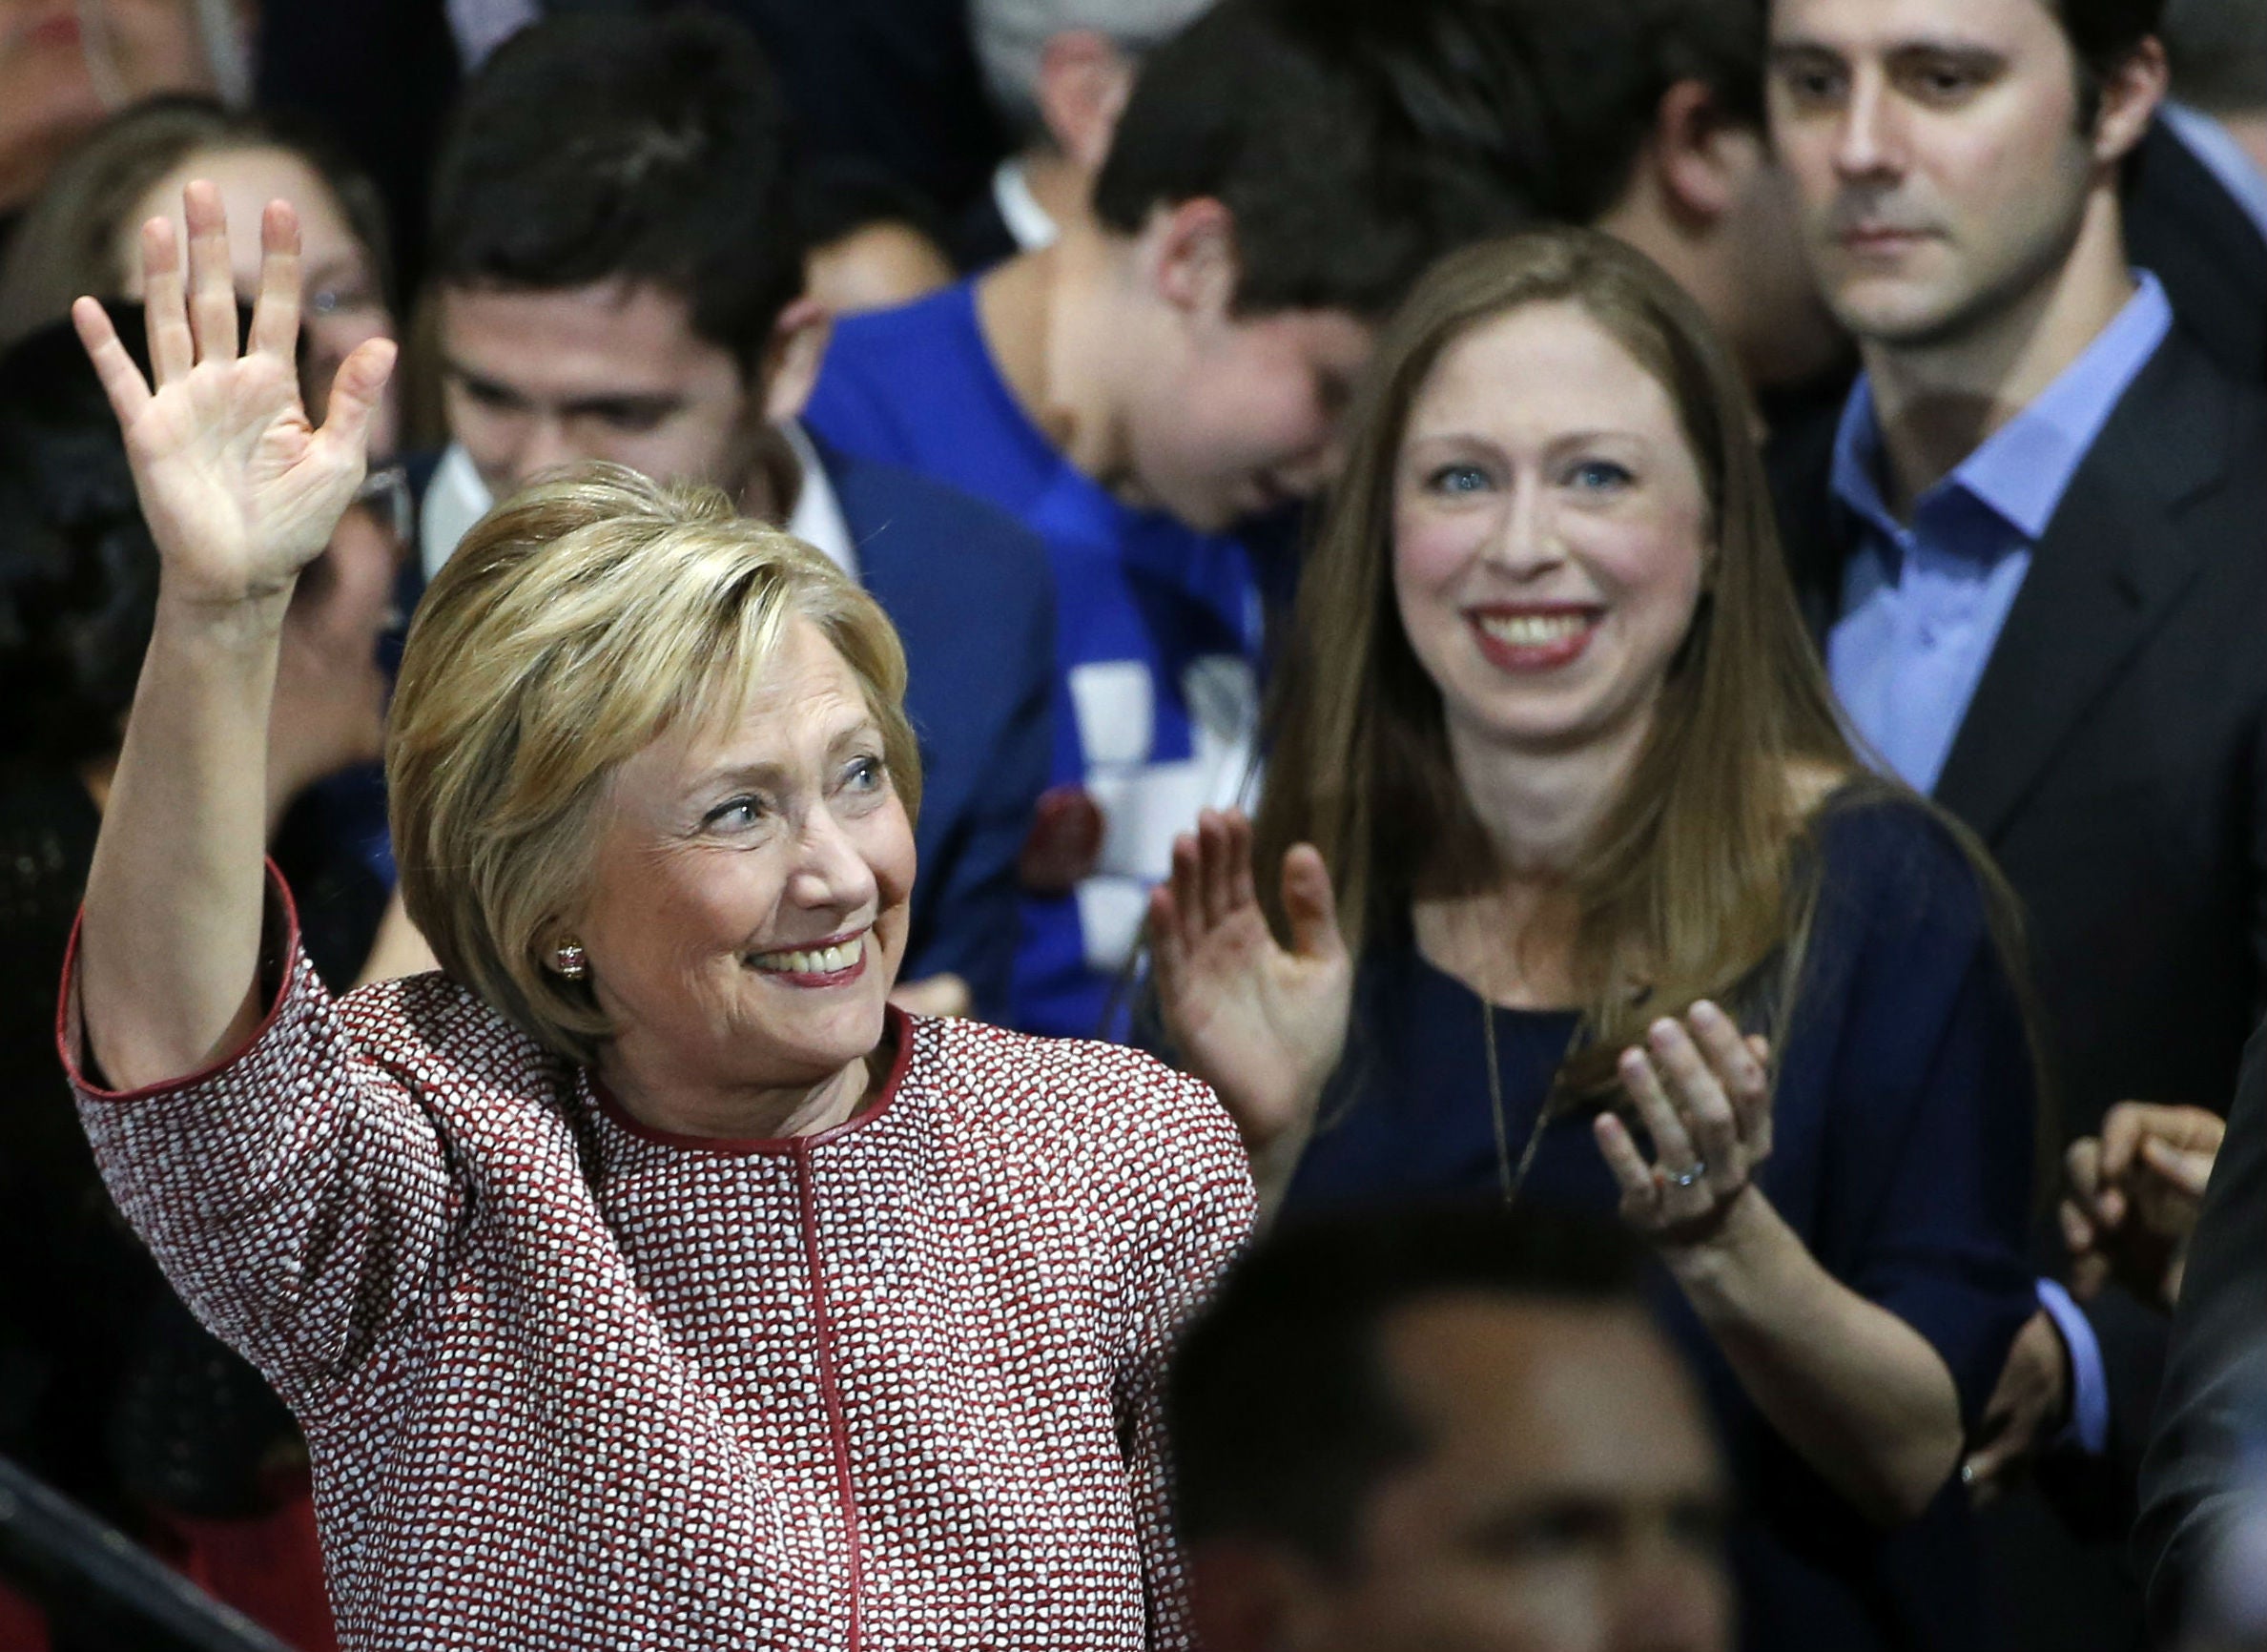 Hillary Clinton is now looking to the general election